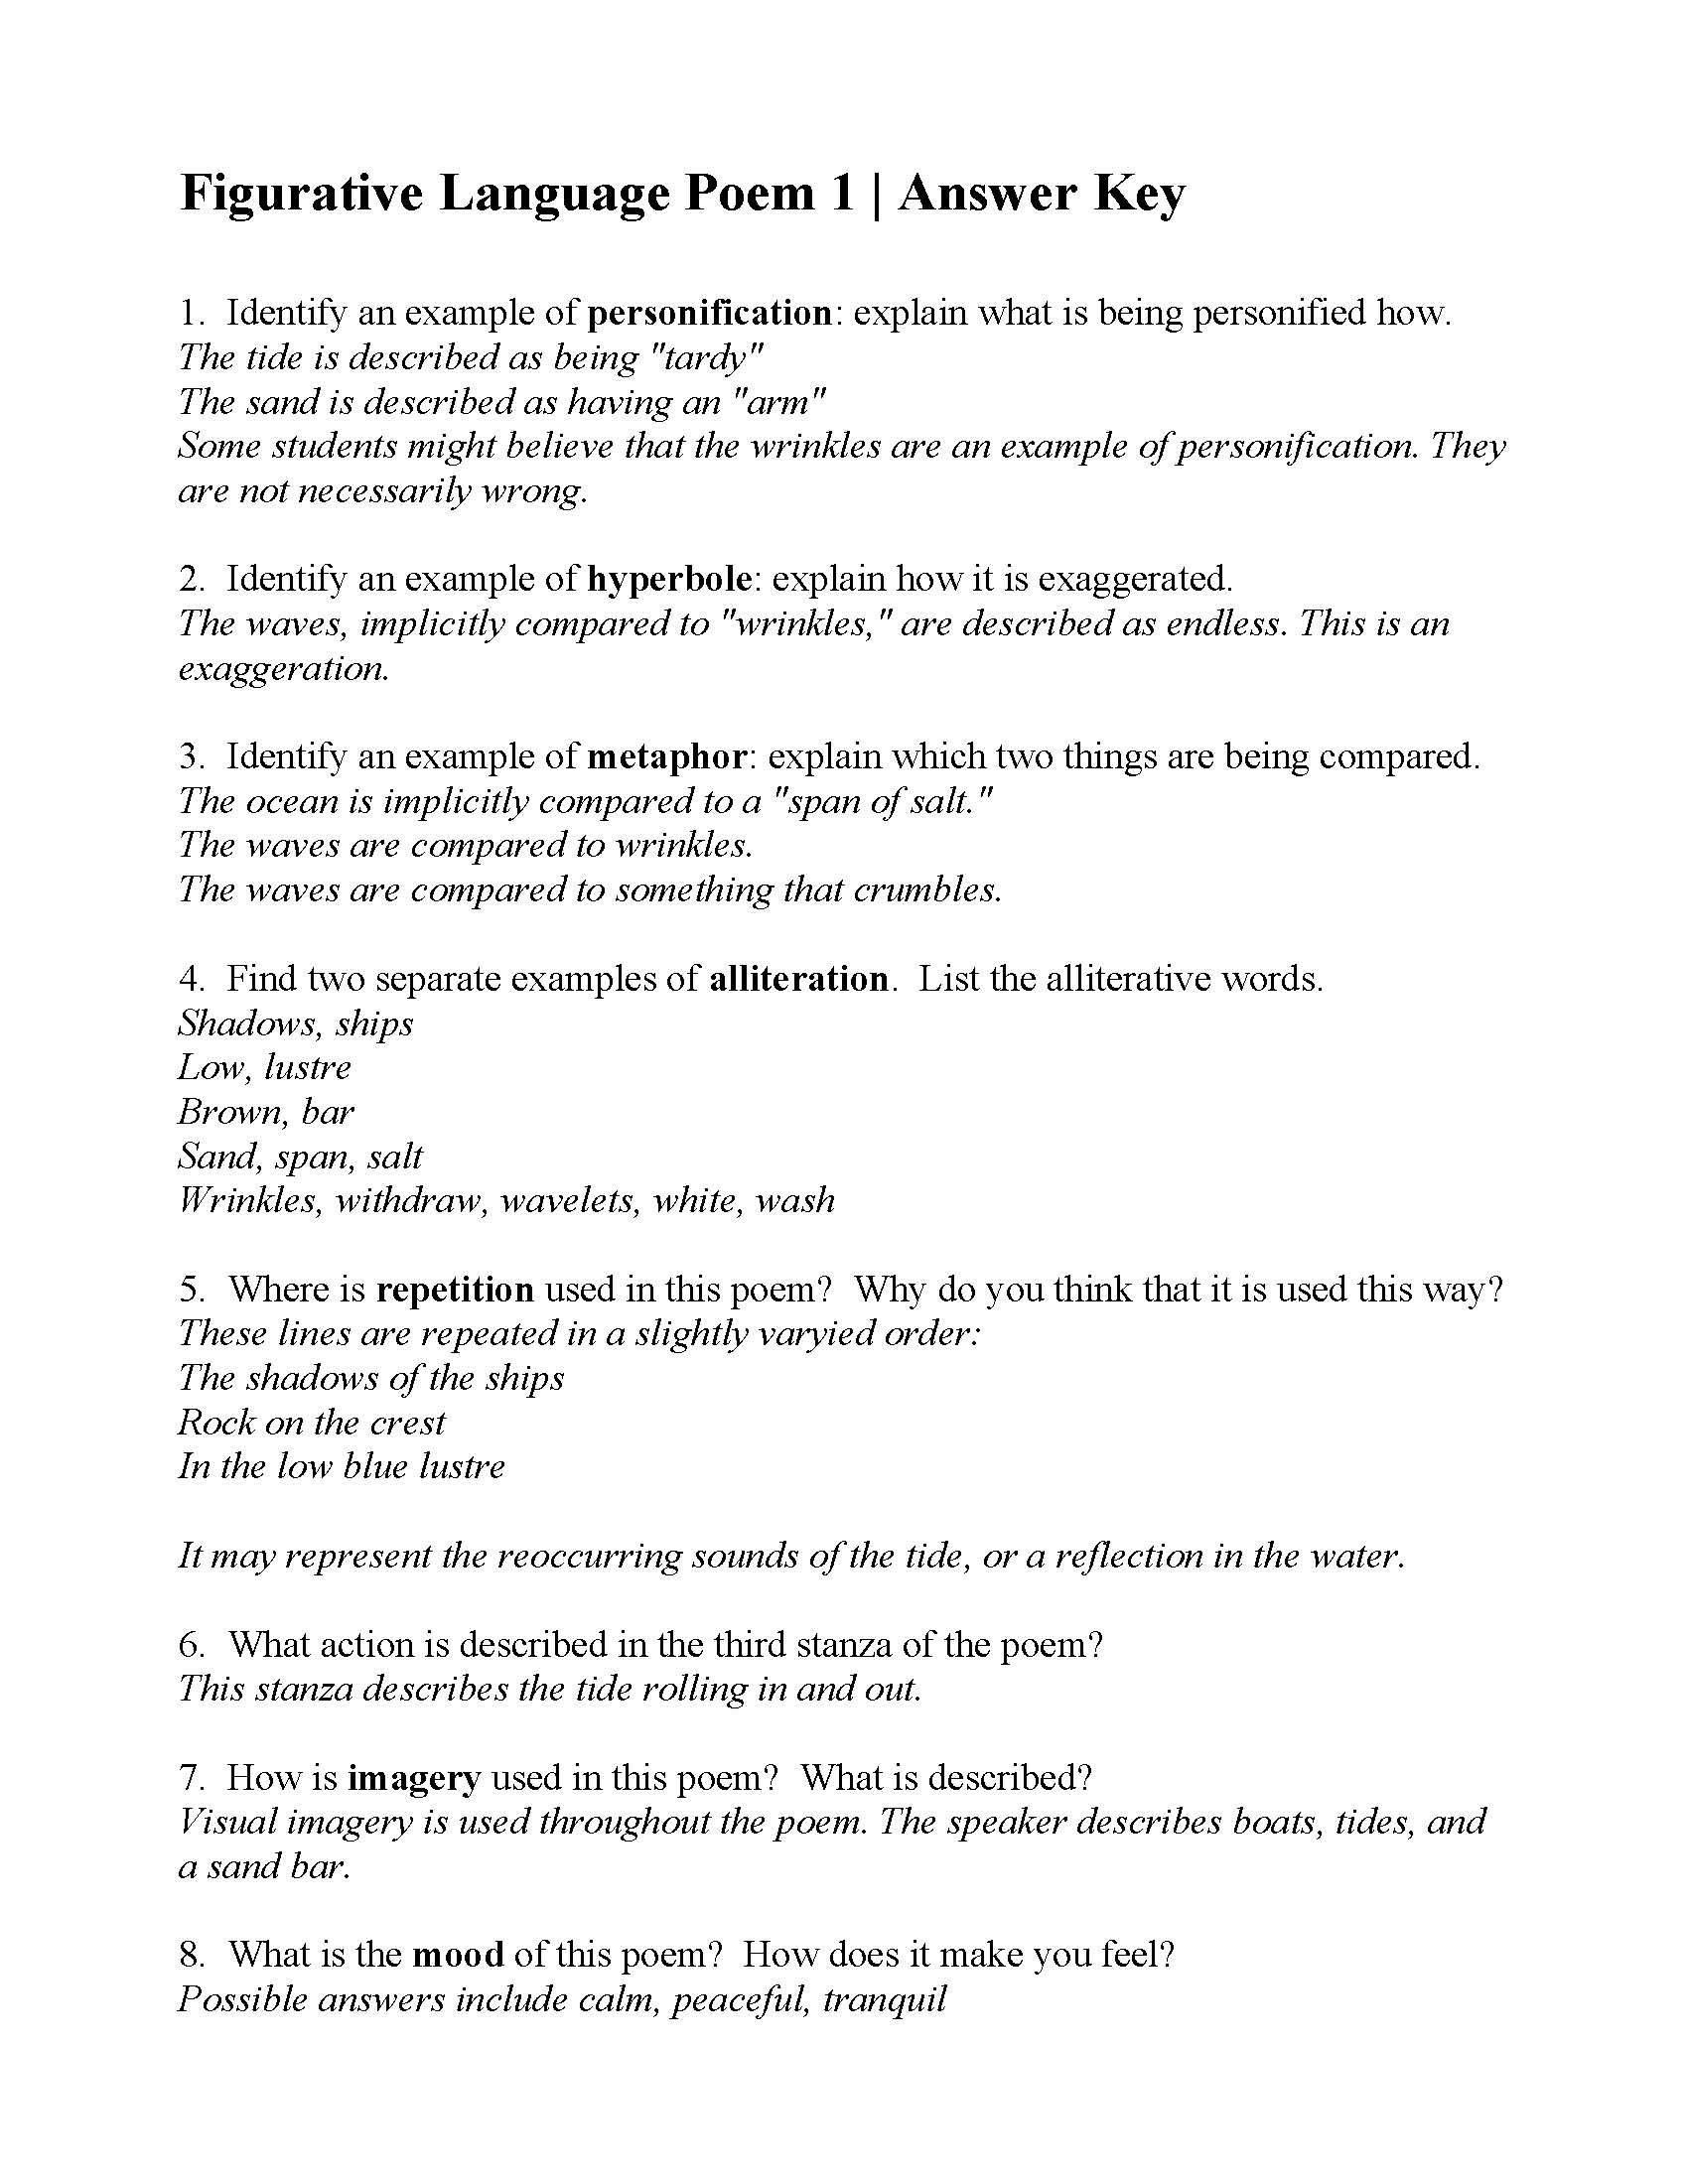 Symbiosis Worksheet Answer Key This is the Answer Key for the Figurative Language Poem 1